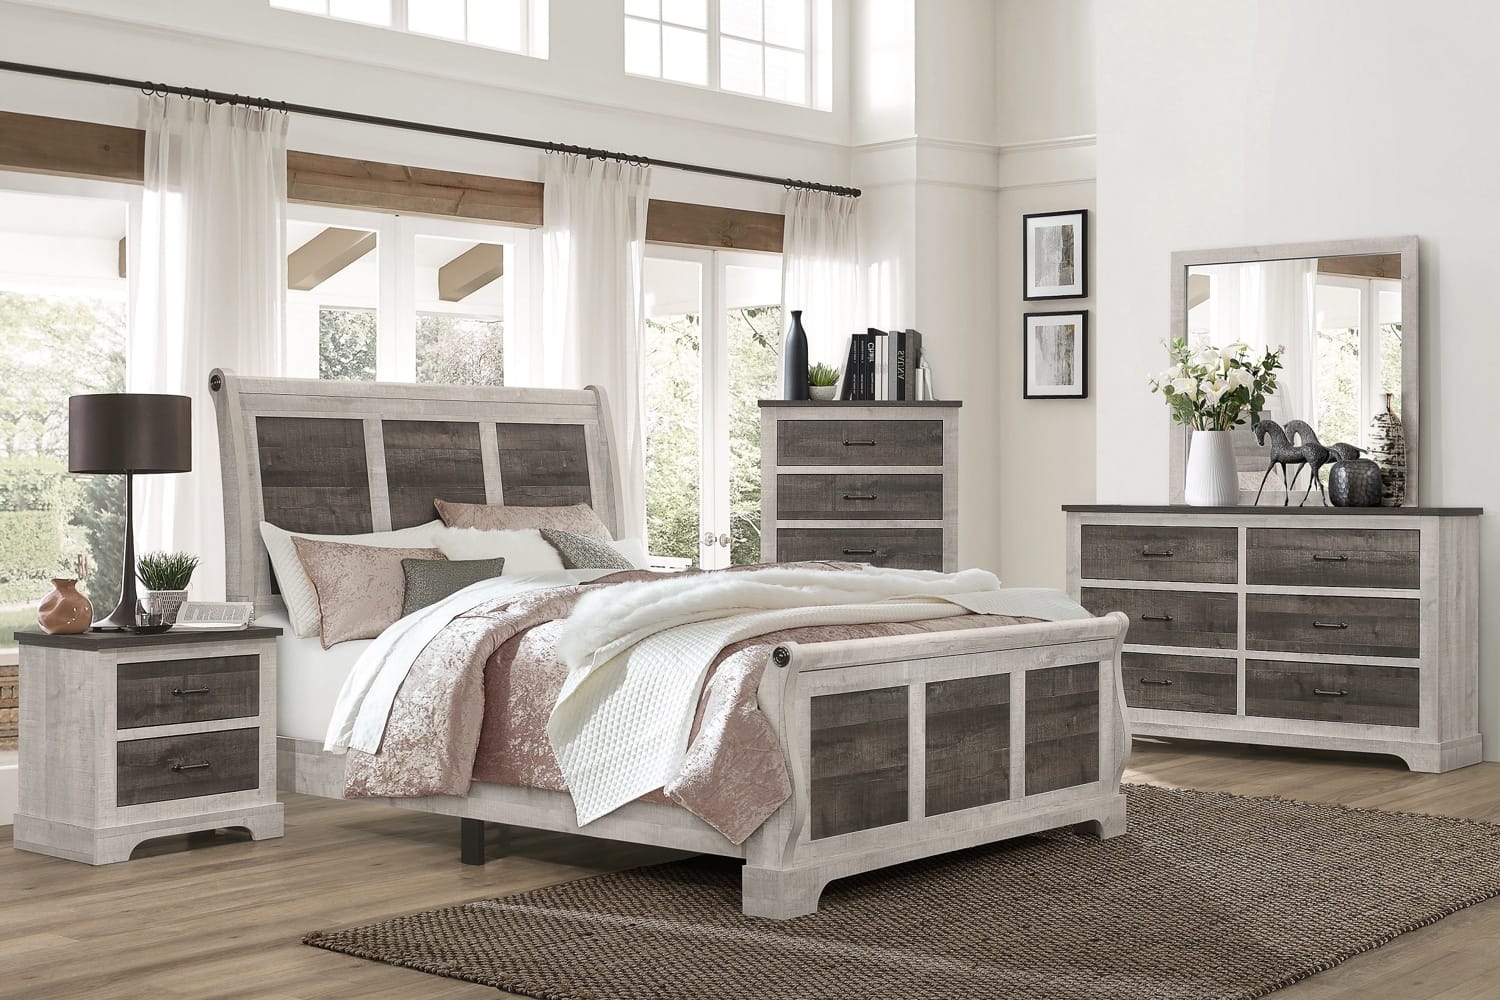 SH2235 Two-Tone King 5 Piece Bedroom Set